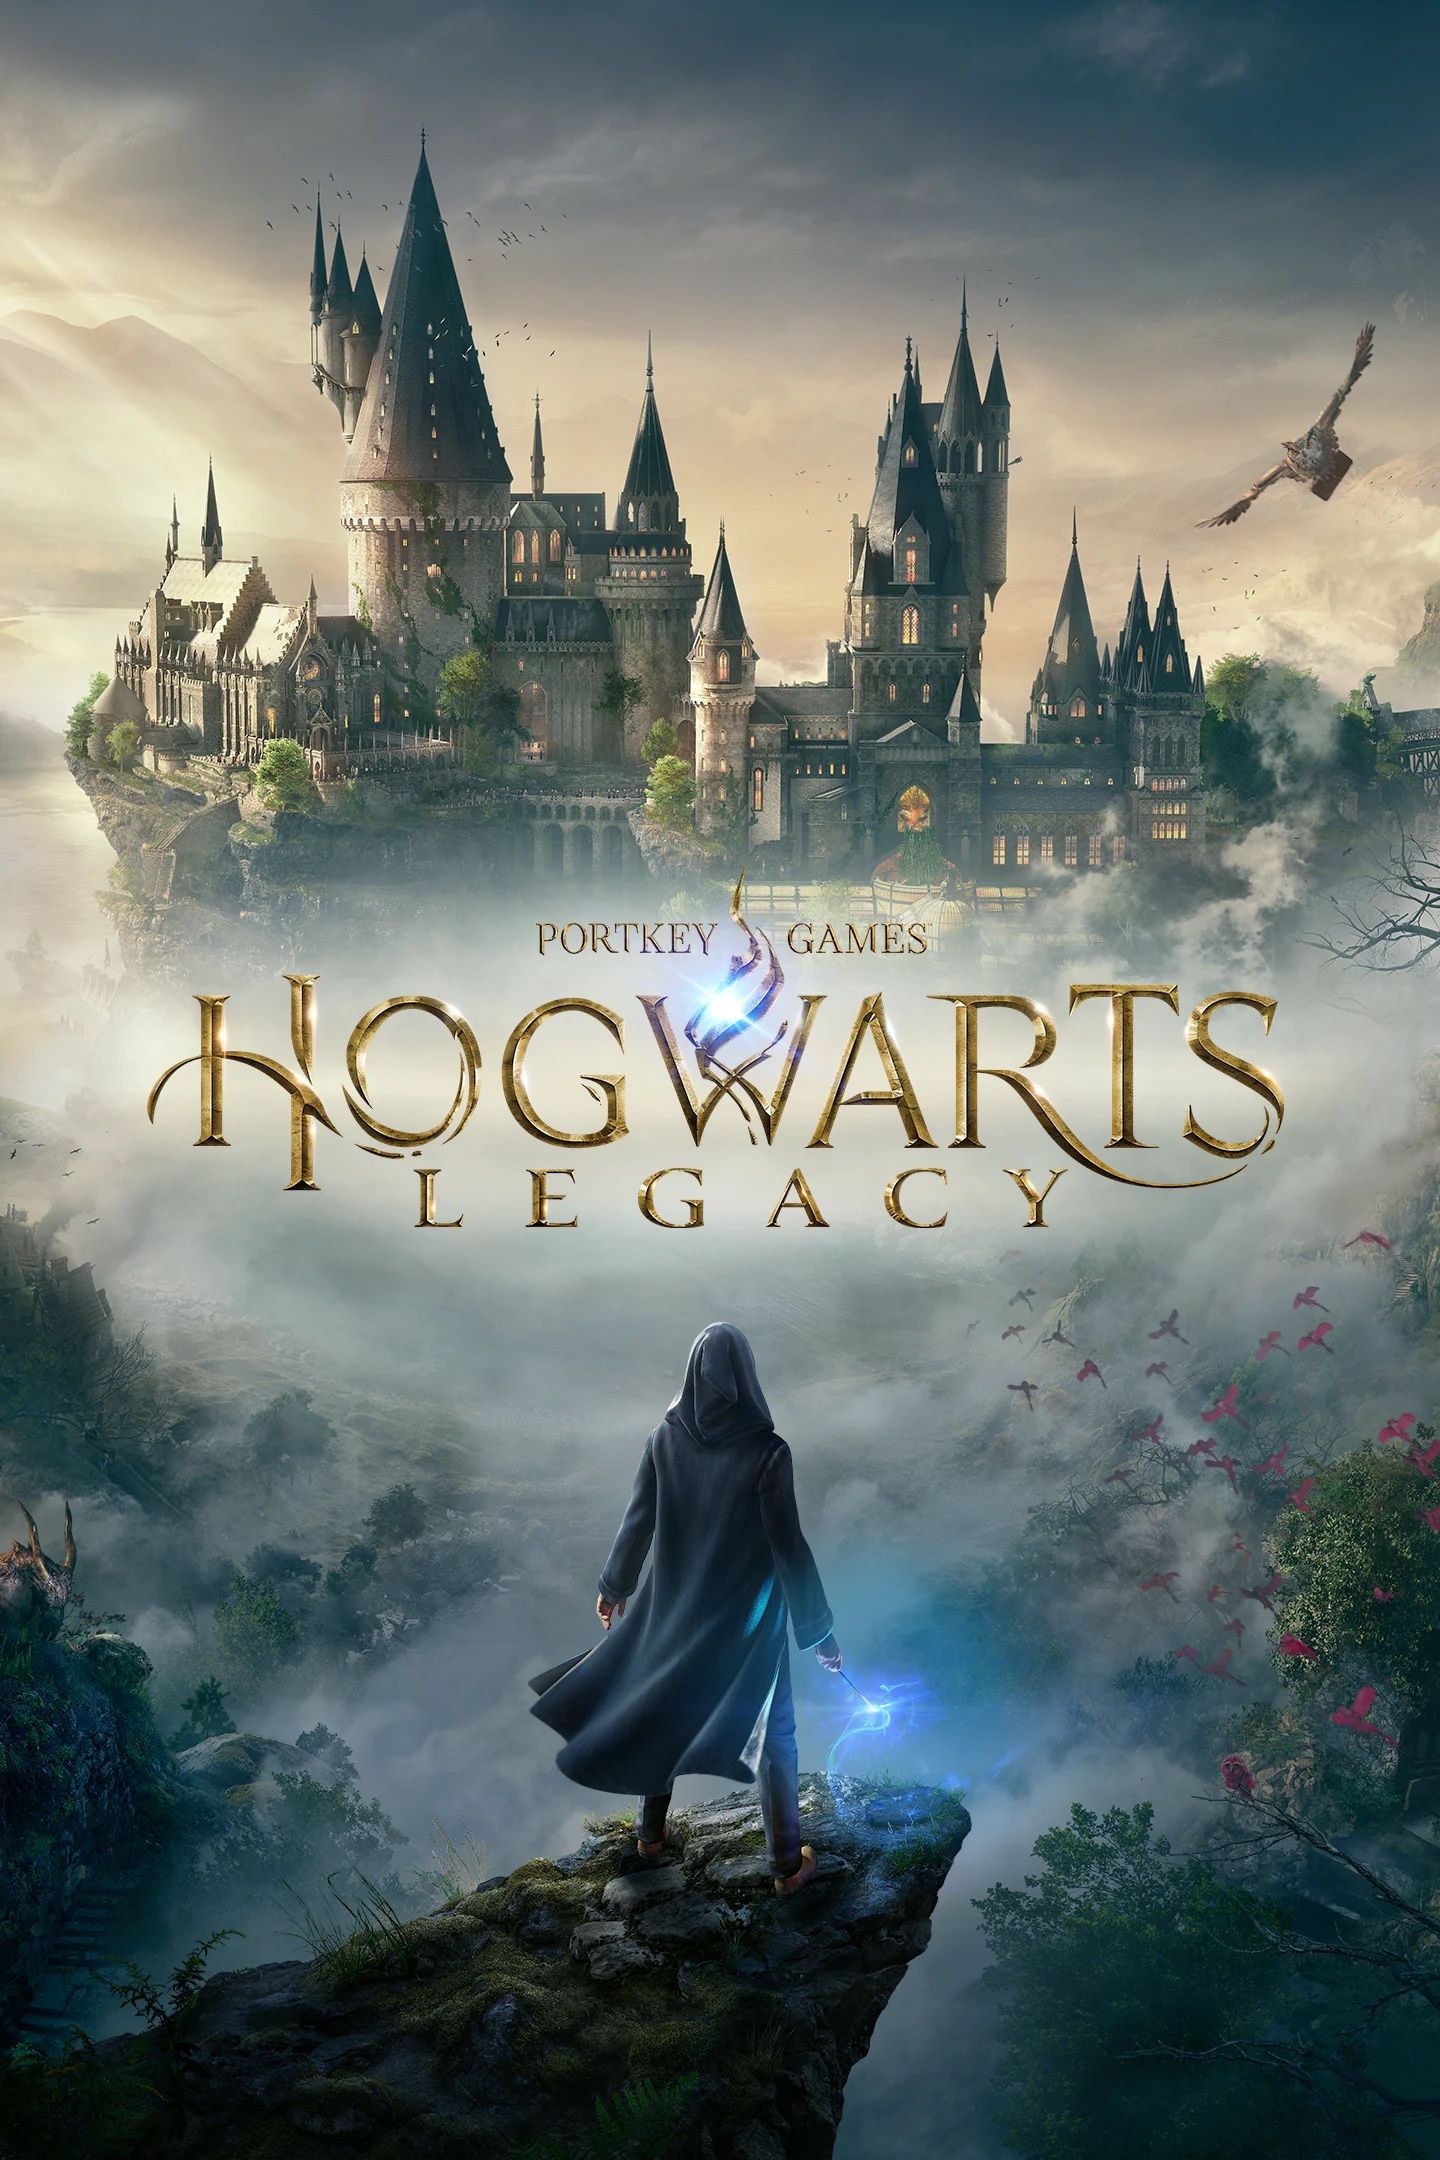 Hogwarts Legacy PlayStation exclusive quest finally coming to Xbox this year